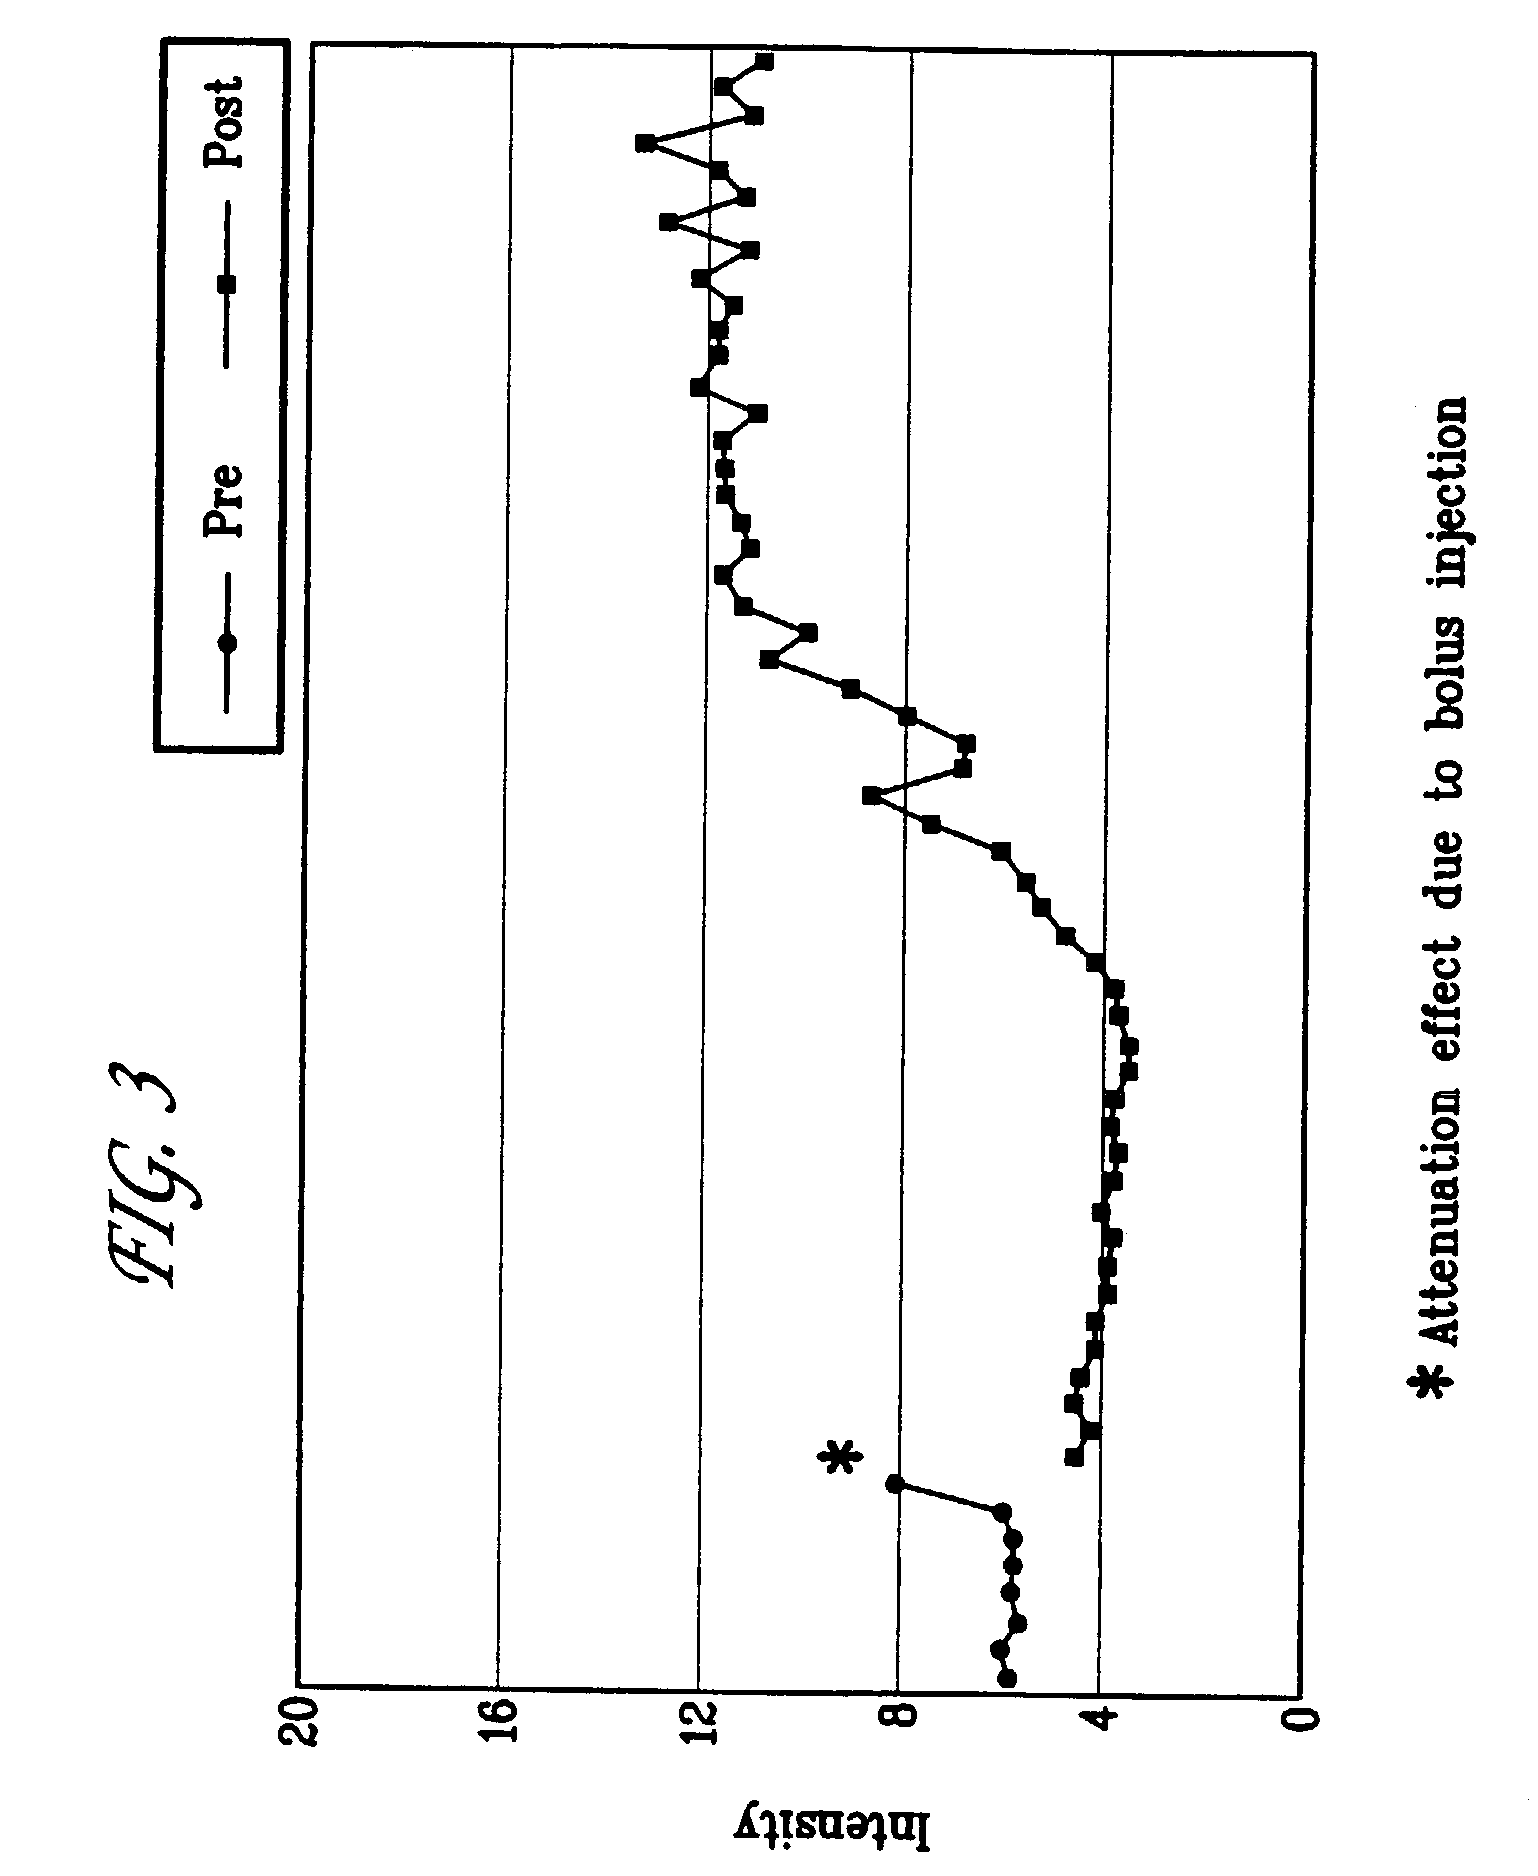 Methods of imaging and treatment